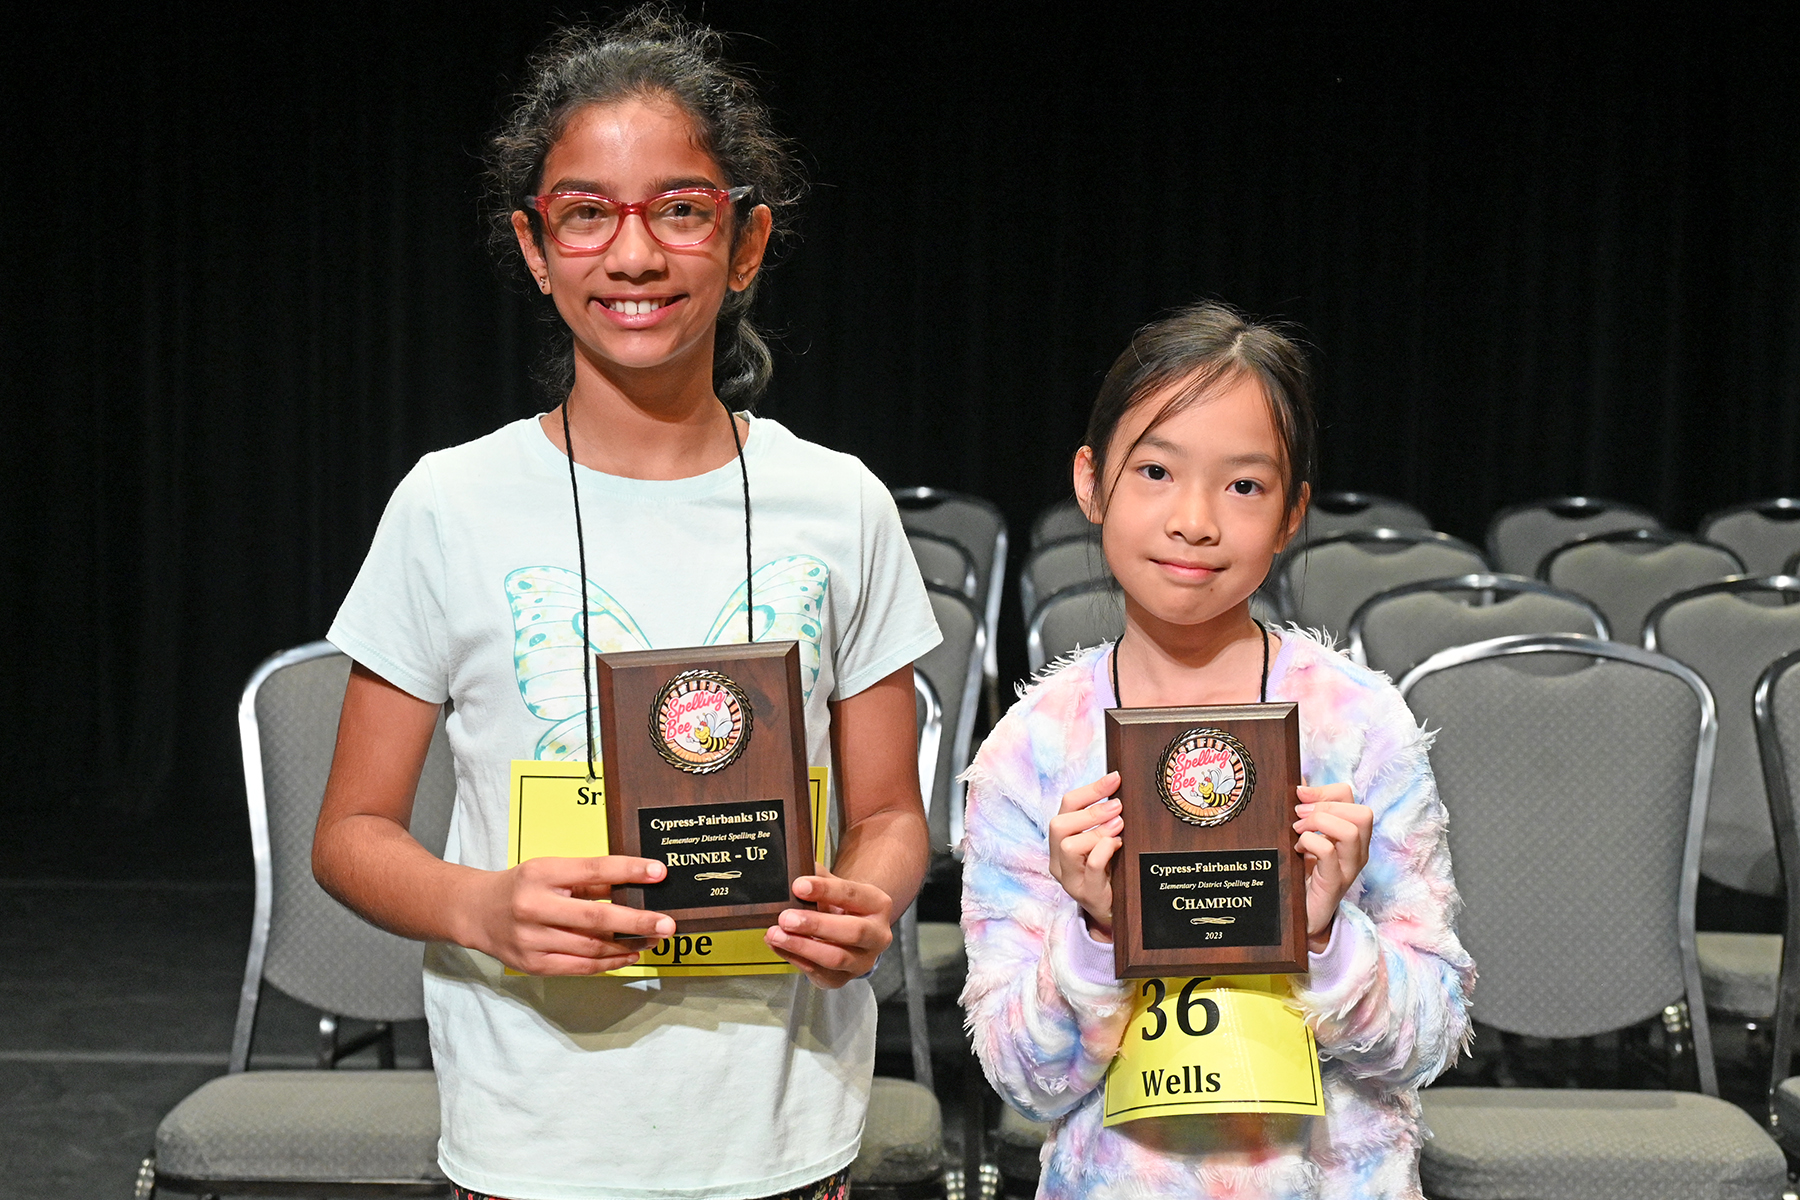 Wells, Pope Students Place 1st, 2nd in Elementary Spelling Bee